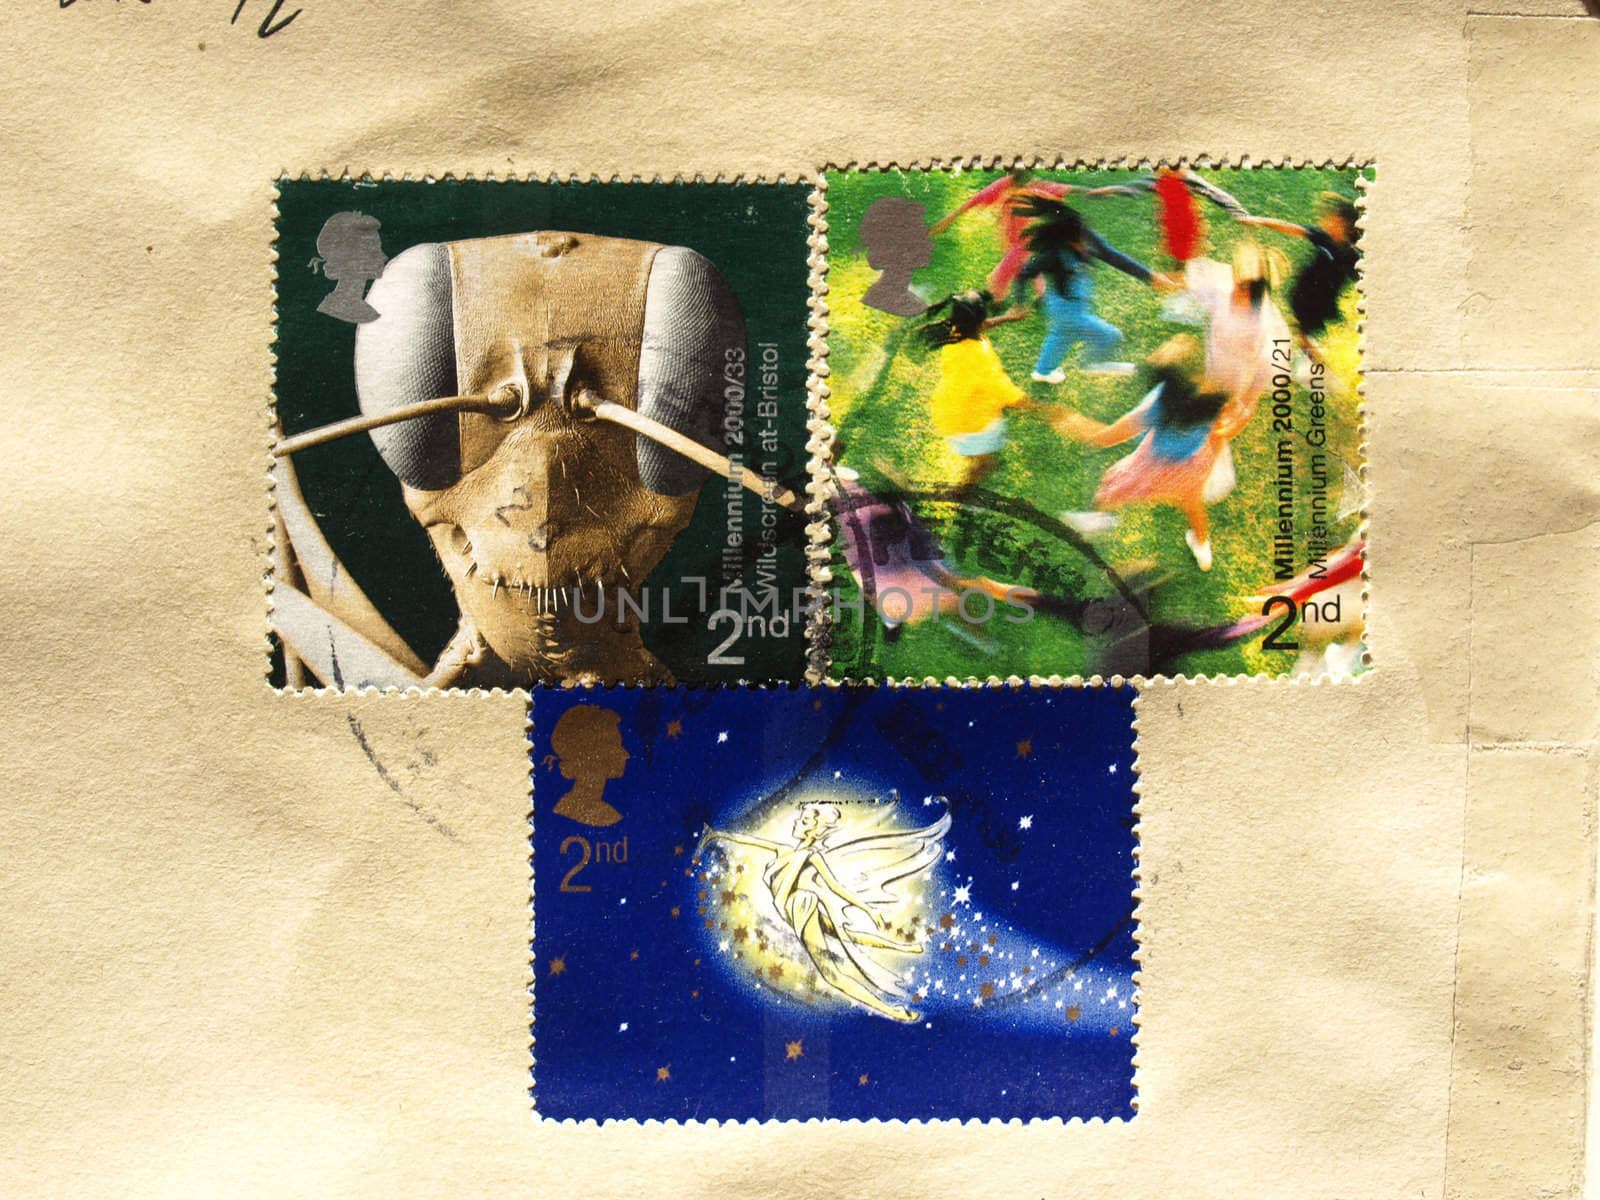 UK stamps by paolo77